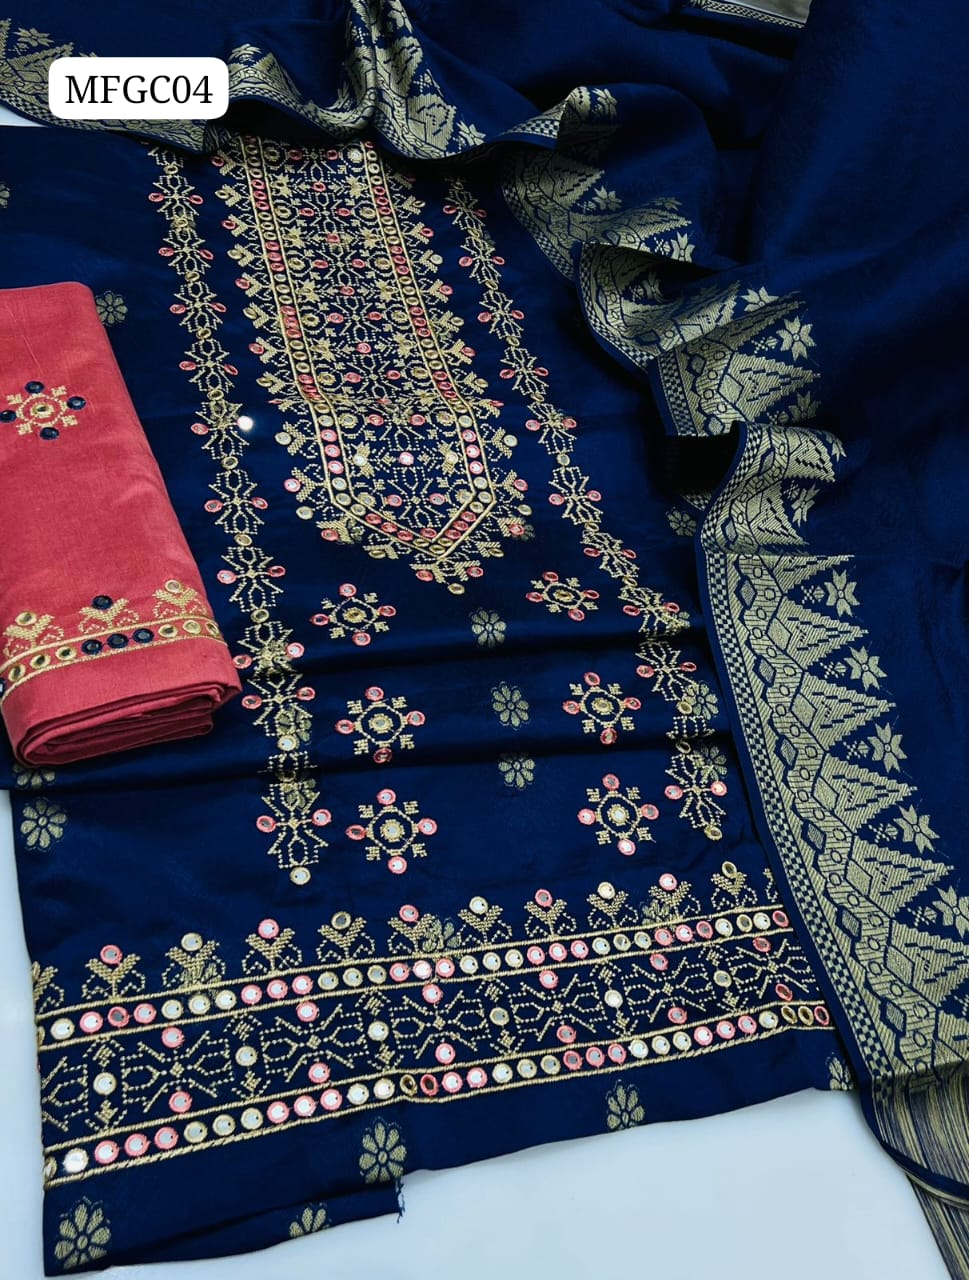 Stapple Sussi Fabric Banarsi Karhai 9Mm Work Shirt With Shawl Full Bnarsi Embroidered And Lining Design Trouser 3Pc Dress